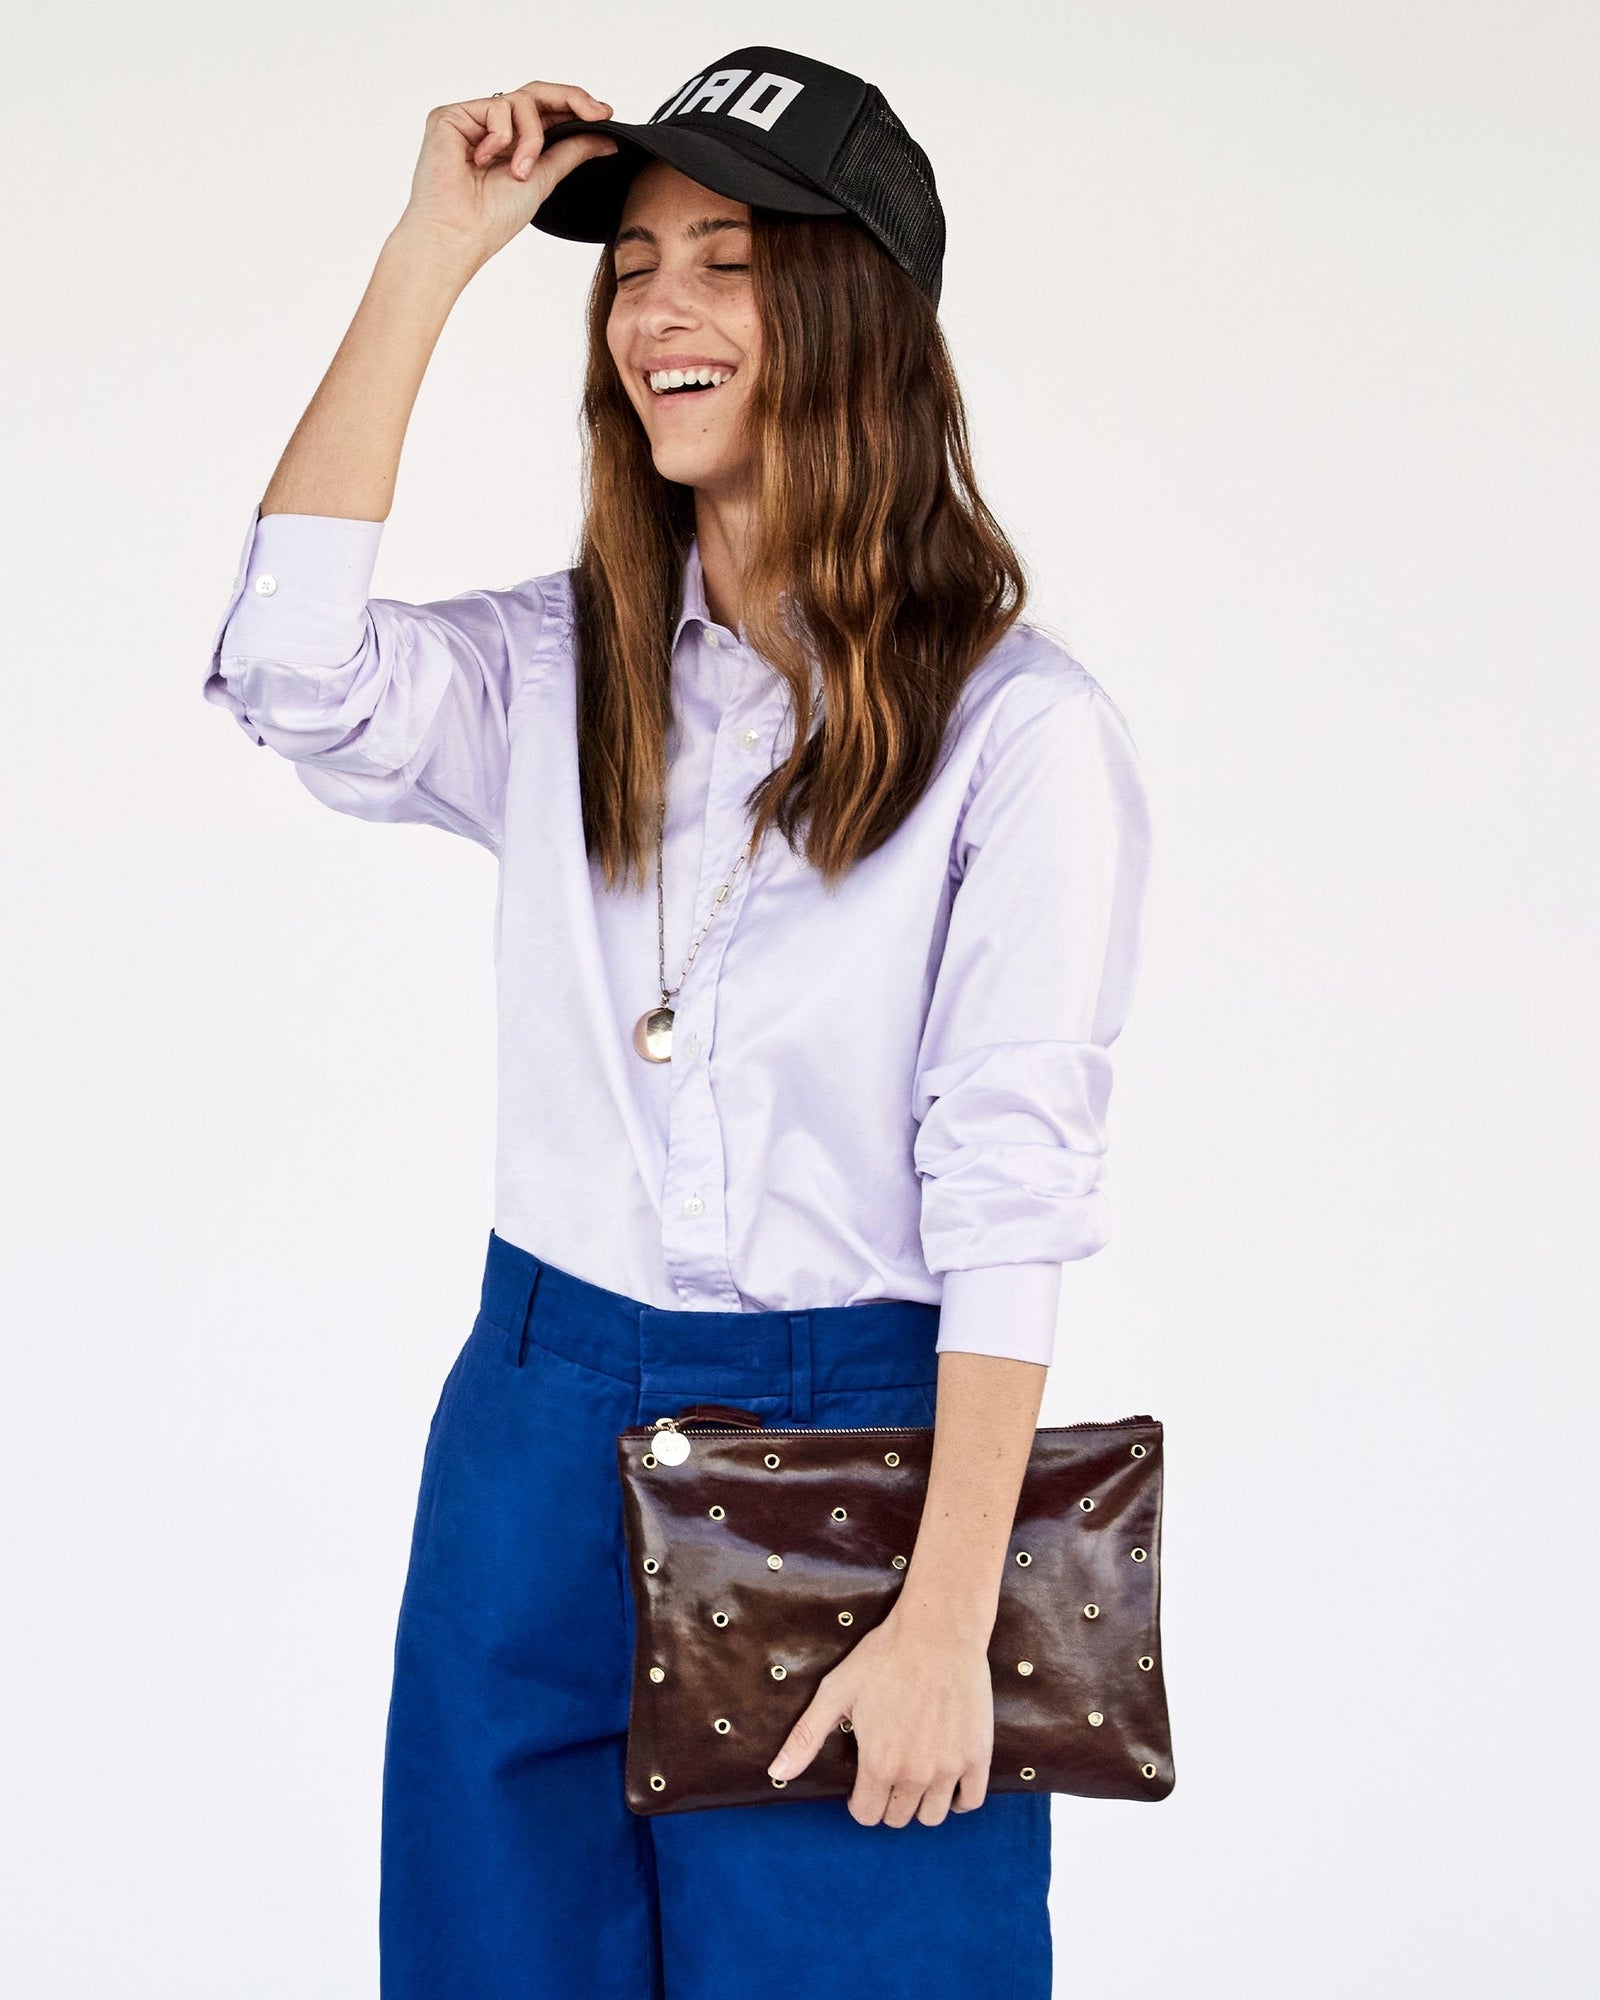 Frannie Carrying the Walnut w/ Grommets Flat Clutch with Tabs as a Clutch